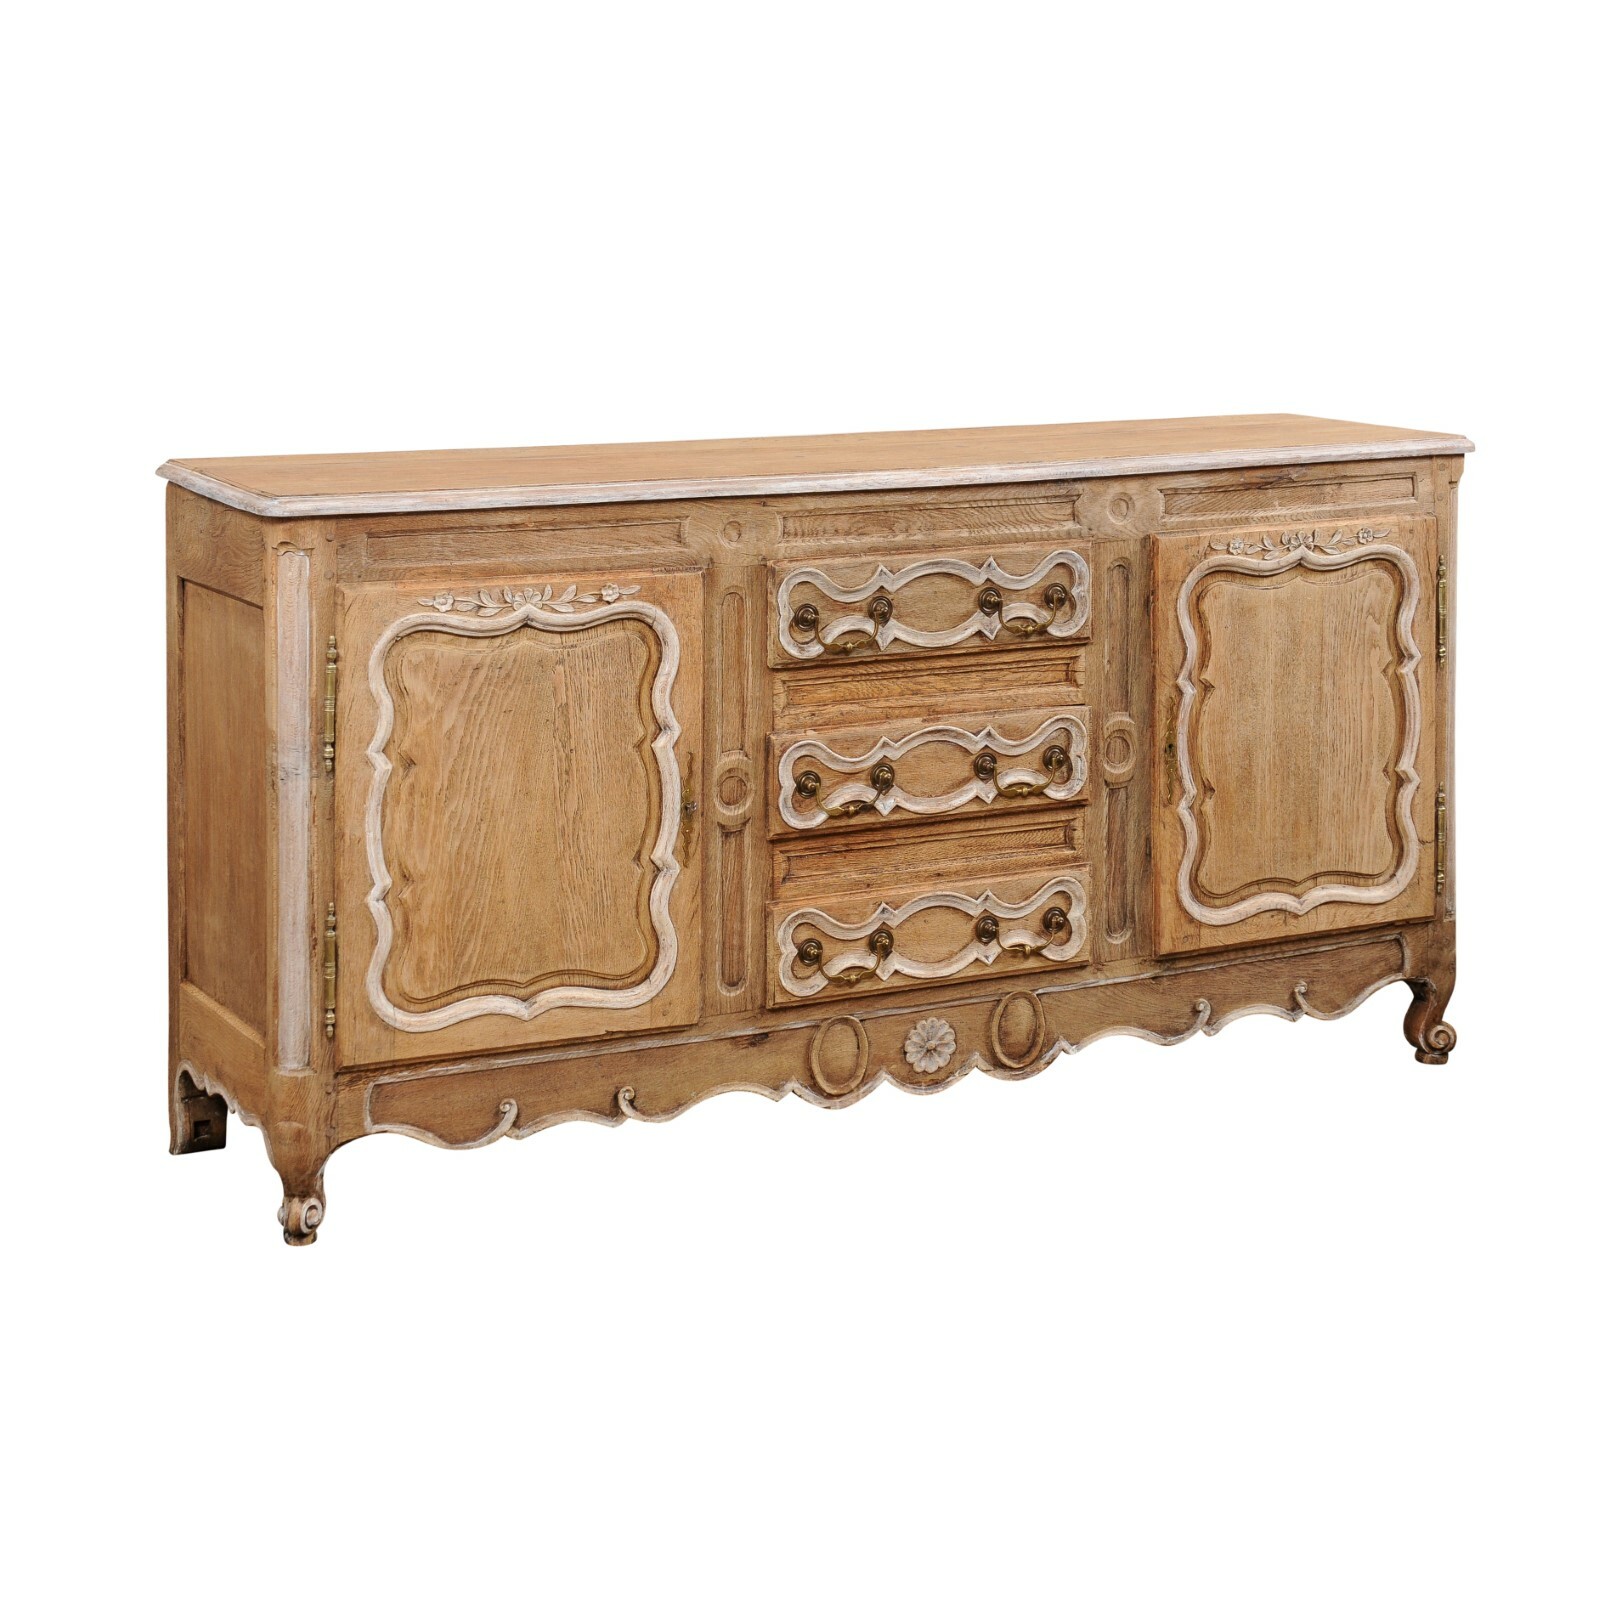 Early 19th C. French Buffet, Bleached Oak